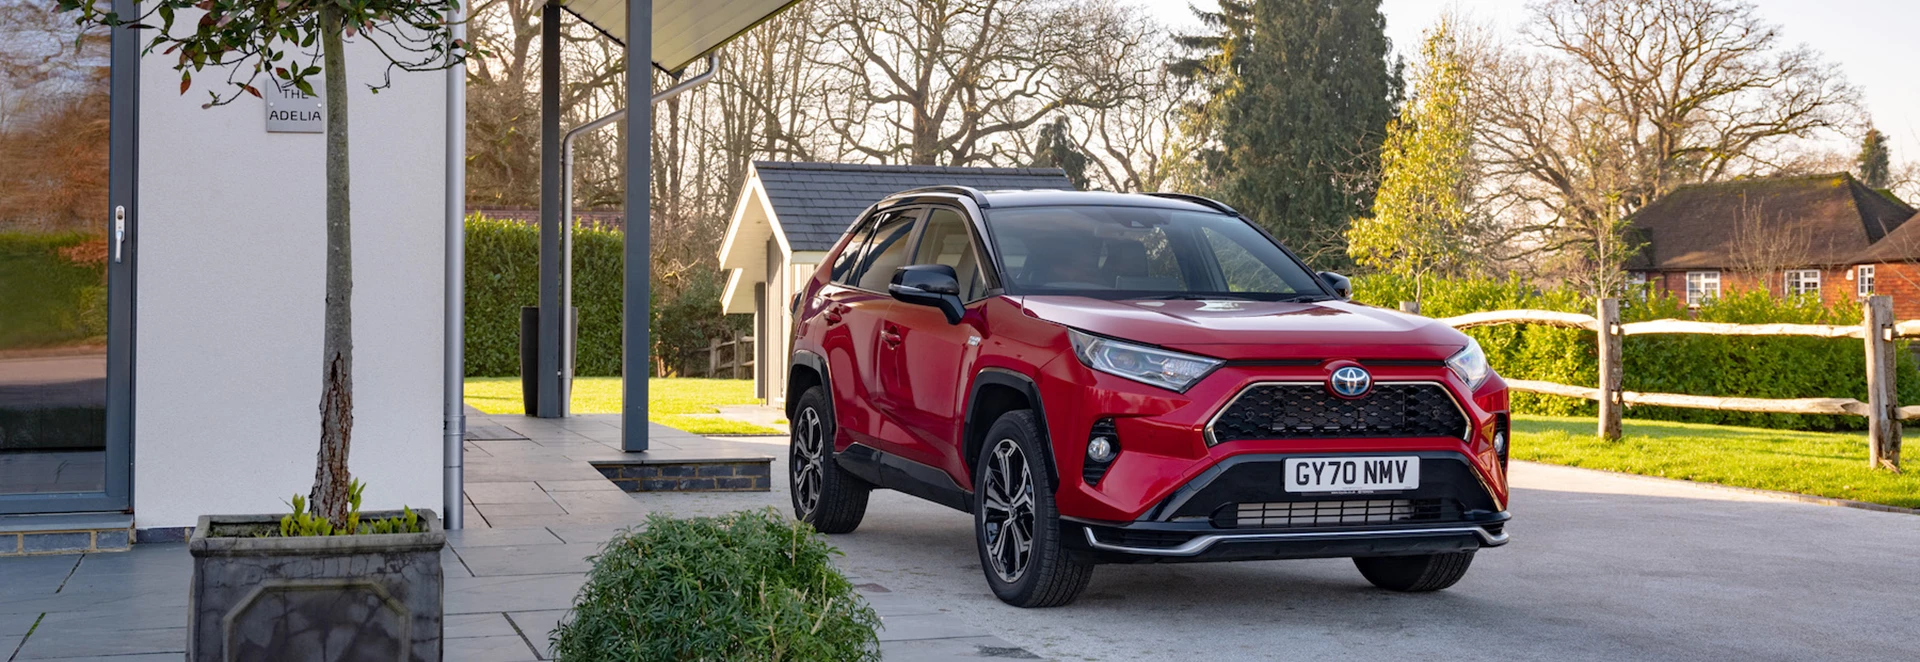 5 things you need to know about the new Toyota RAV4 Plug-in 